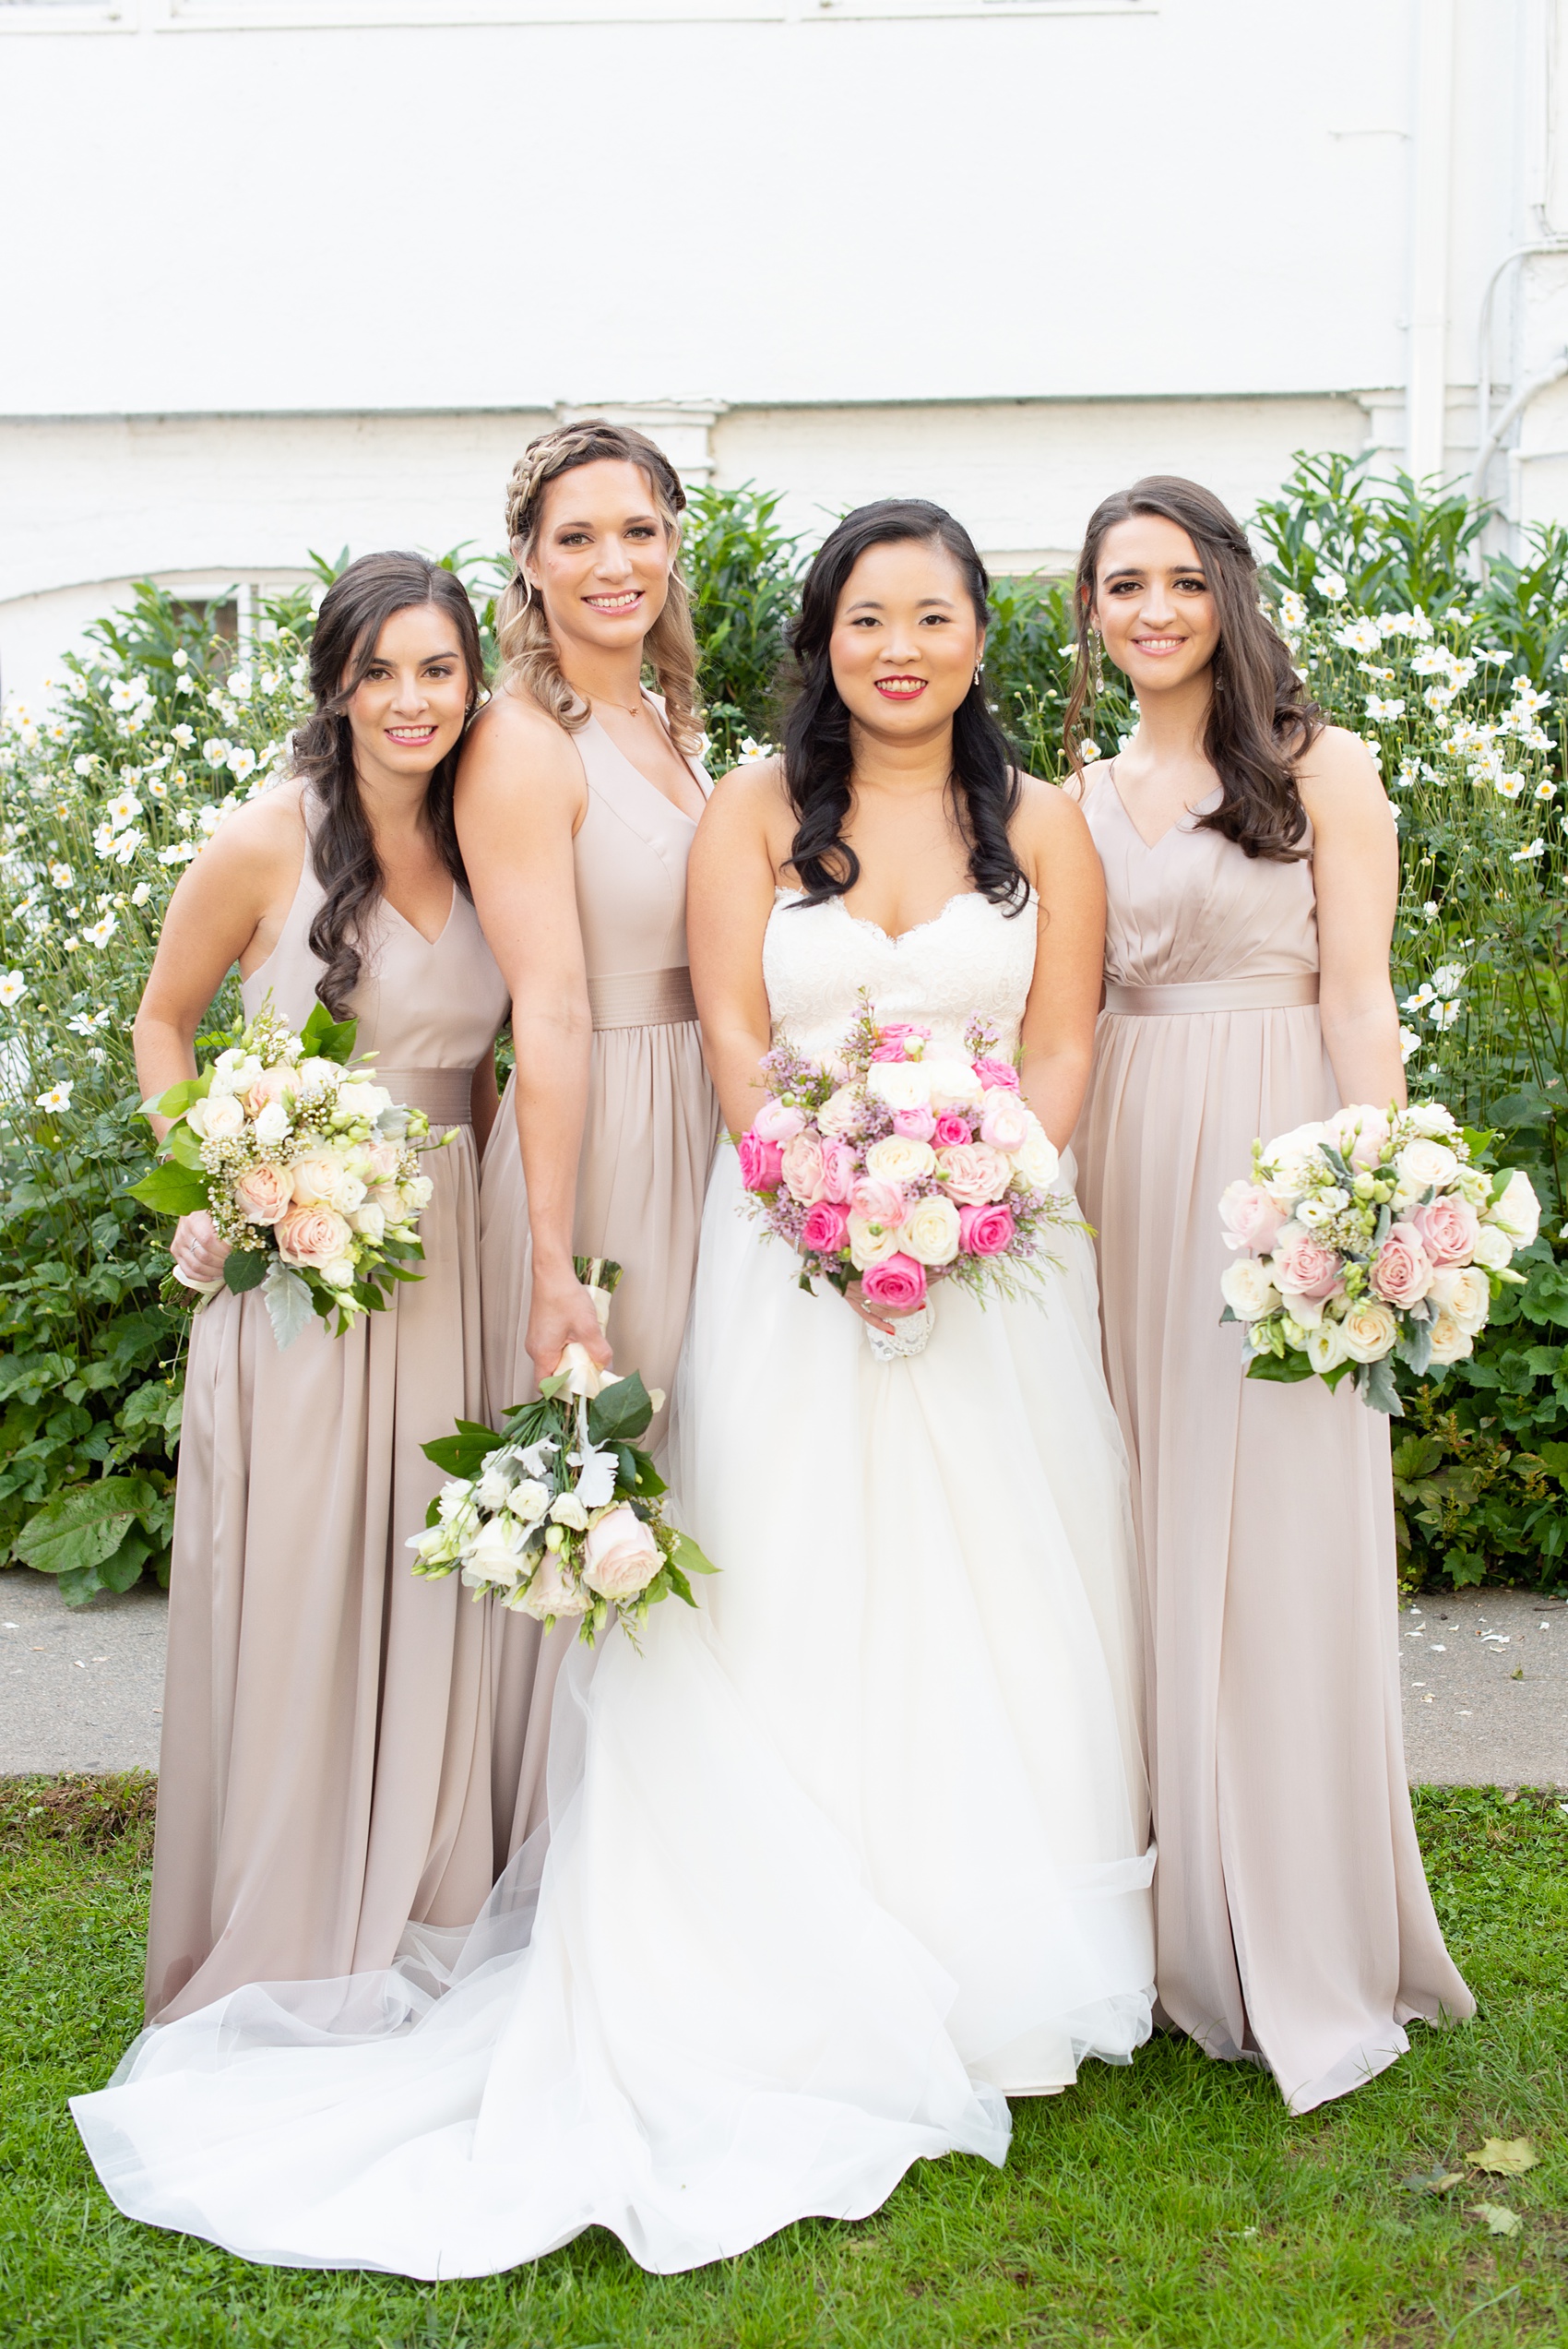 Wedding photos at Crabtree's Kittle House in Chappaqua, New York by Mikkel Paige Photography. This venue in Westchester county was the perfect place to capture their groomsmen photos in a country setting, with the bridesmaids in mis-matched dusty rose silk gowns carrying pink, white and peach rose and eucalyptus bouquets with Dusty Miller. The historic home is very close to NYC and perfect for a fall celebration. Click through for more wedding inspiration from their day! #bridesmaids #mikkelpaige #CrabtreesKittleHouse #WestchesterWeddingVenues #WestchesterWedding #SeptemberWedding #weddingparty #bride #dustryrose #fallwedding